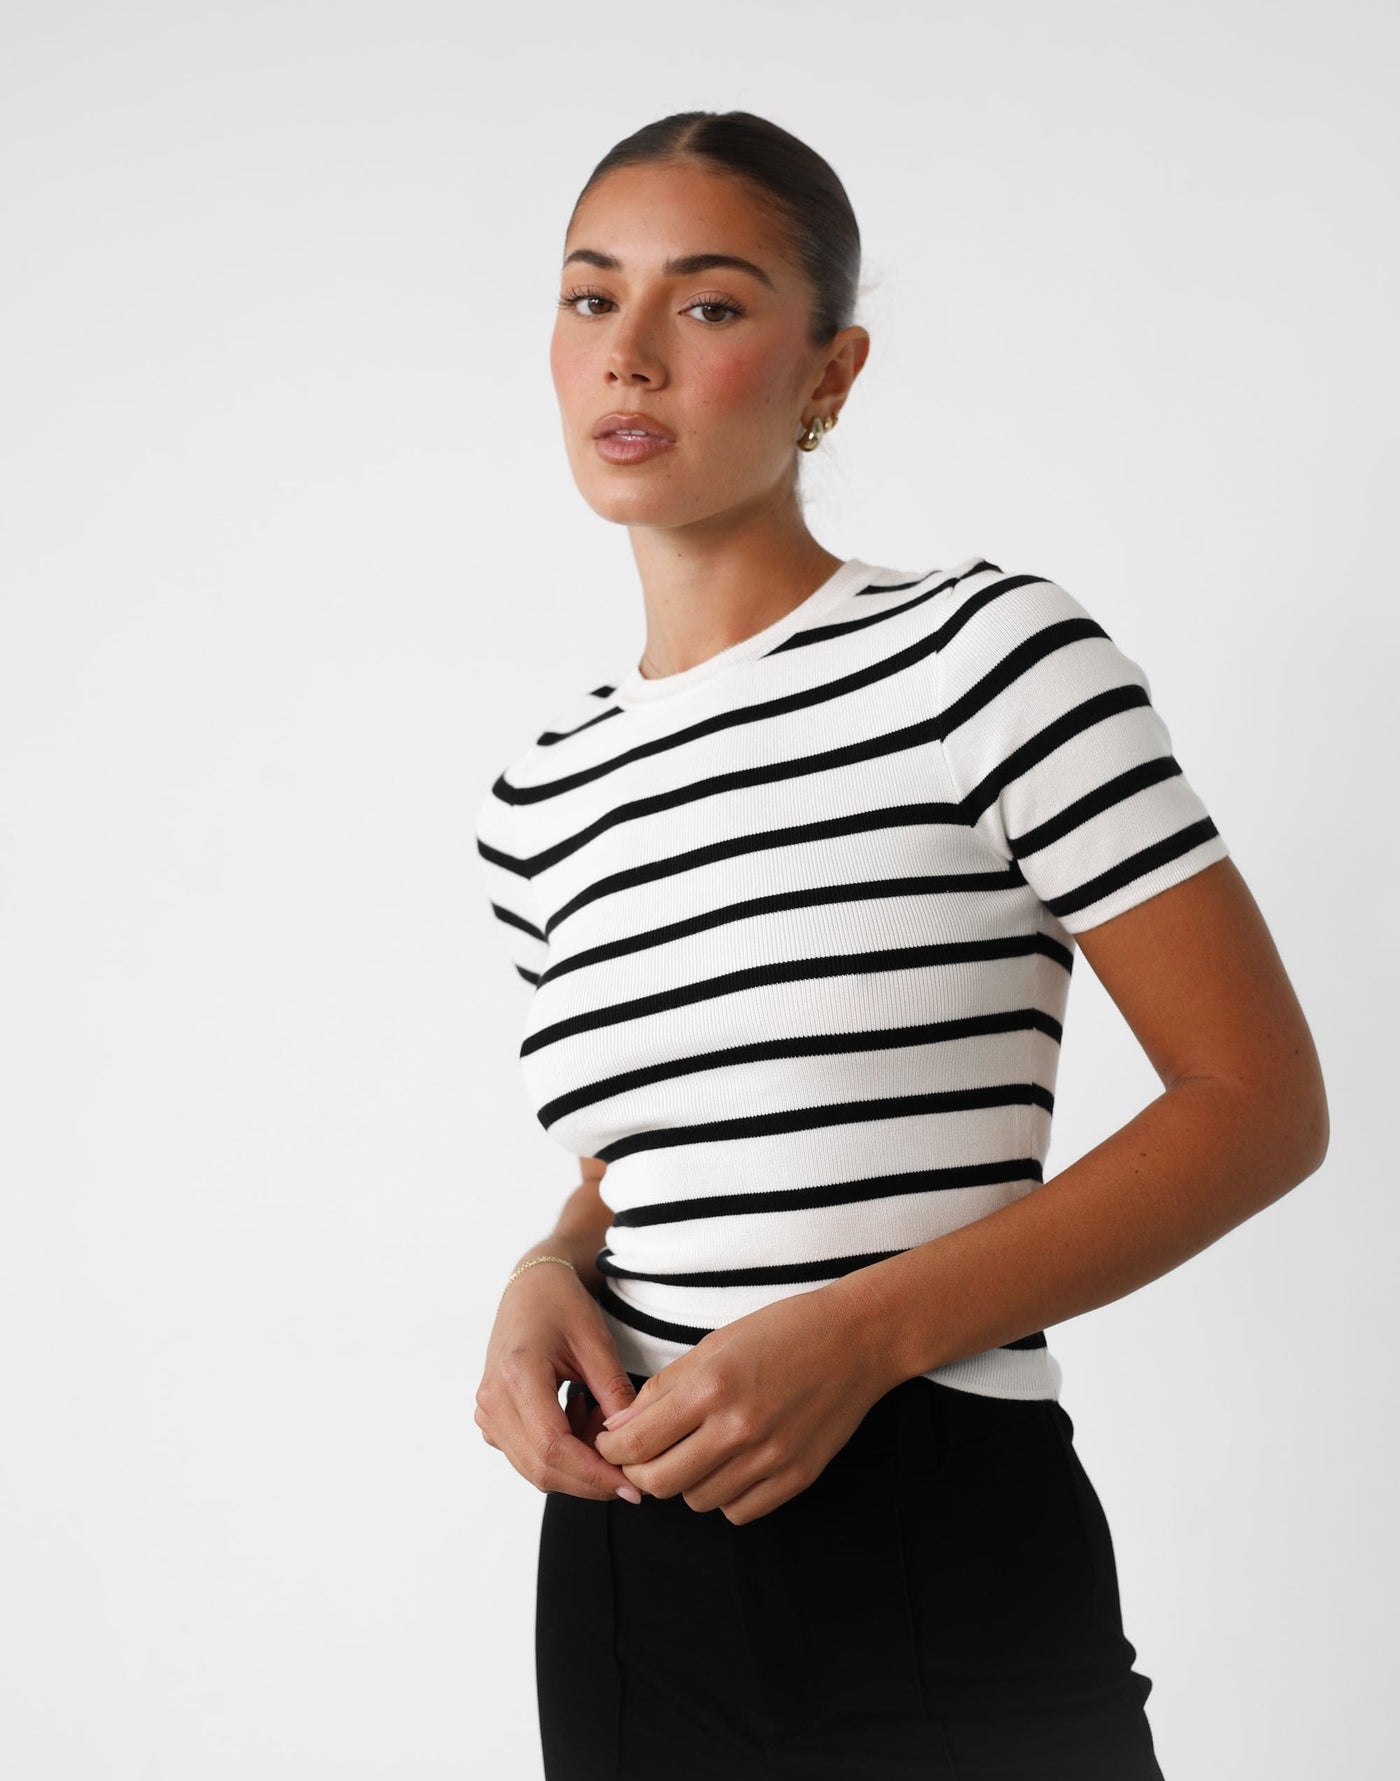 Alivina Top (Black/White) - Striped Knit Rounded Neckline Top – CHARCOAL